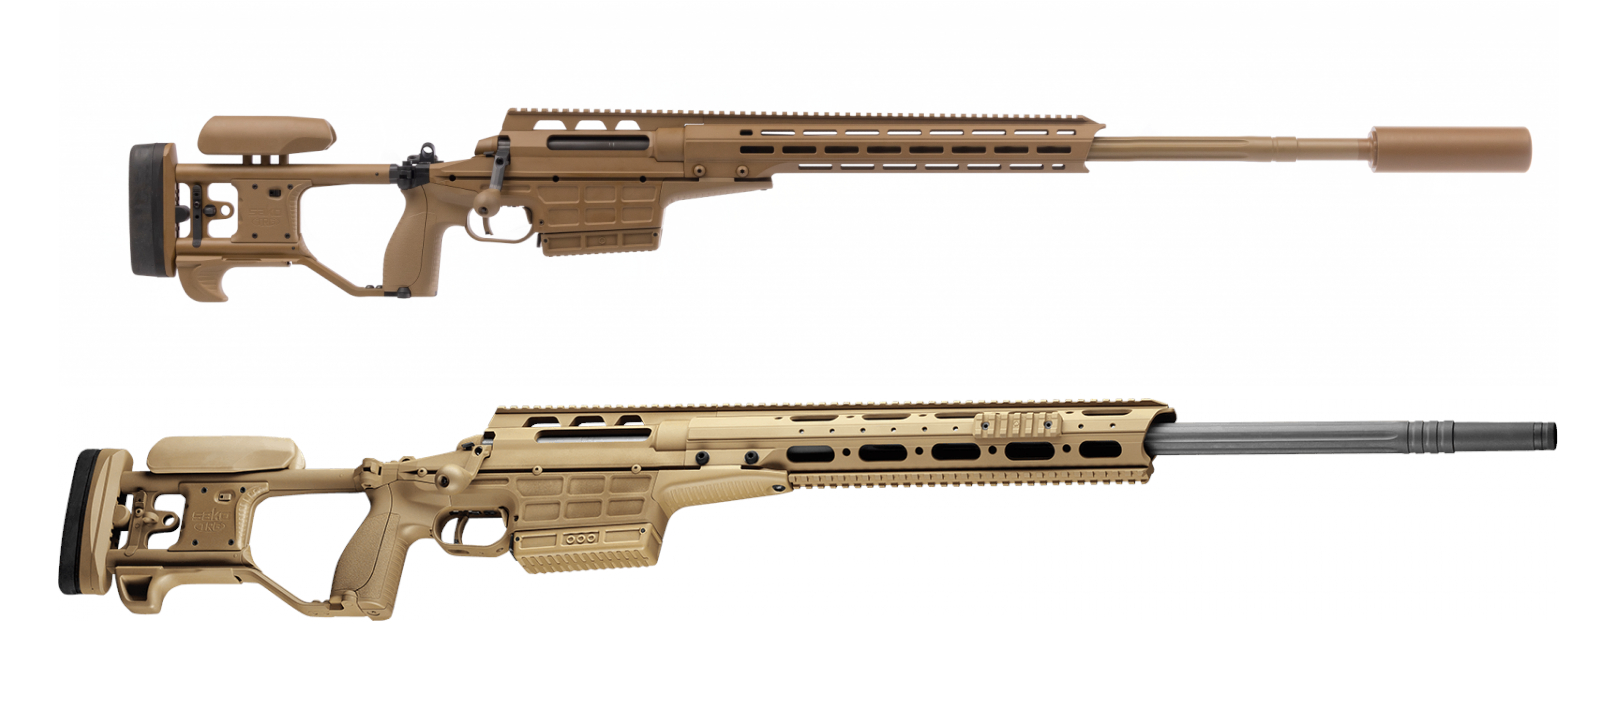 Canadian Army selects new sniper rifle — 229 SAKO rifles to be